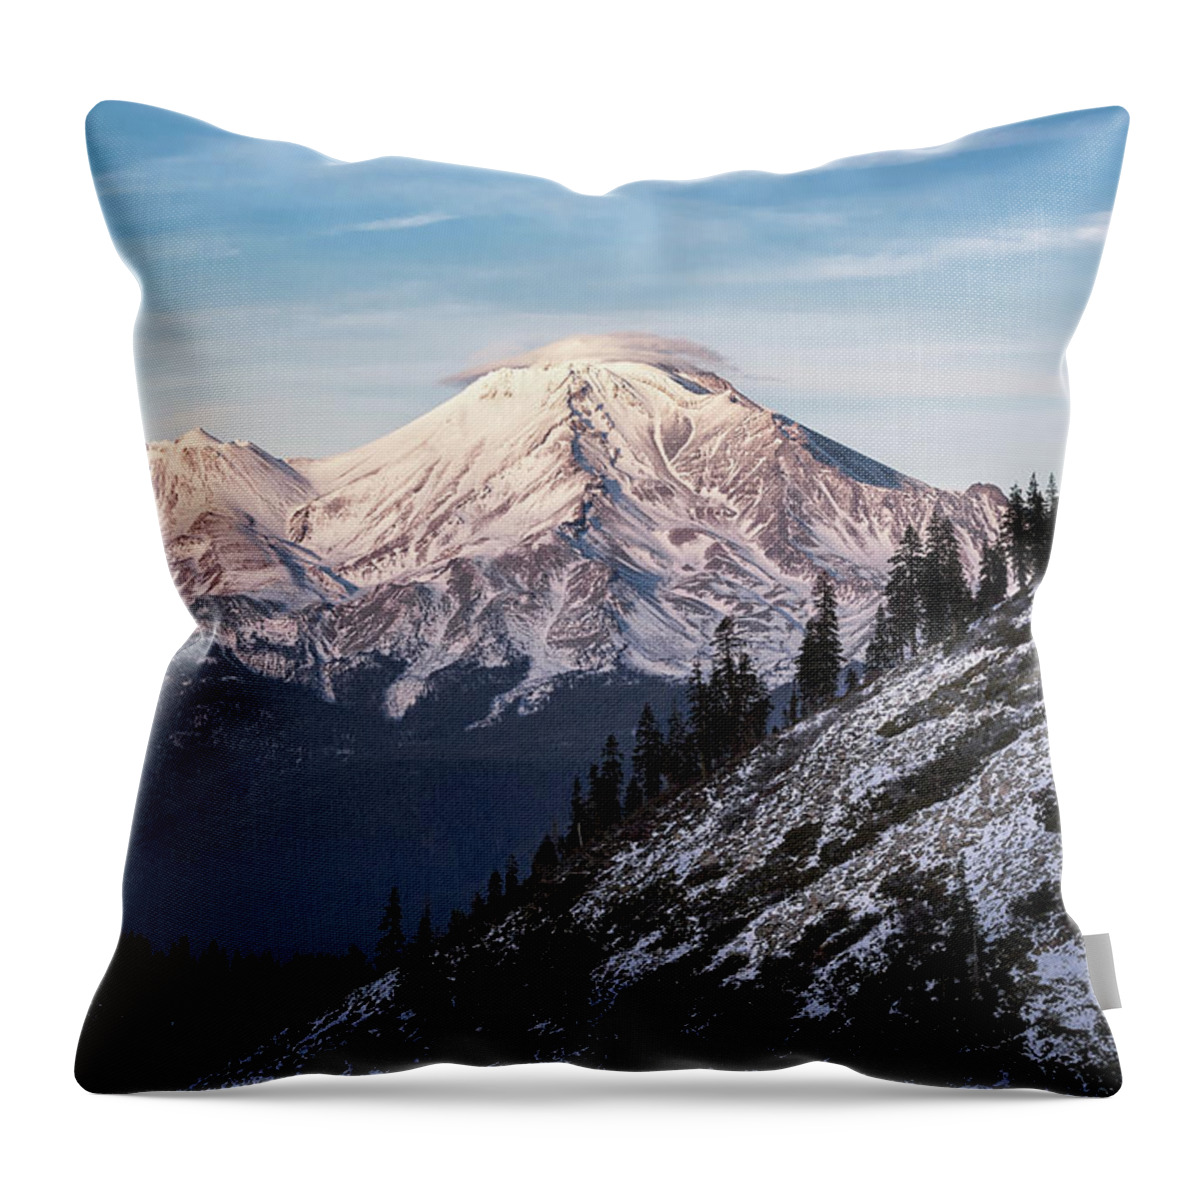 California Throw Pillow featuring the photograph Mt. Shasta by Gary Geddes